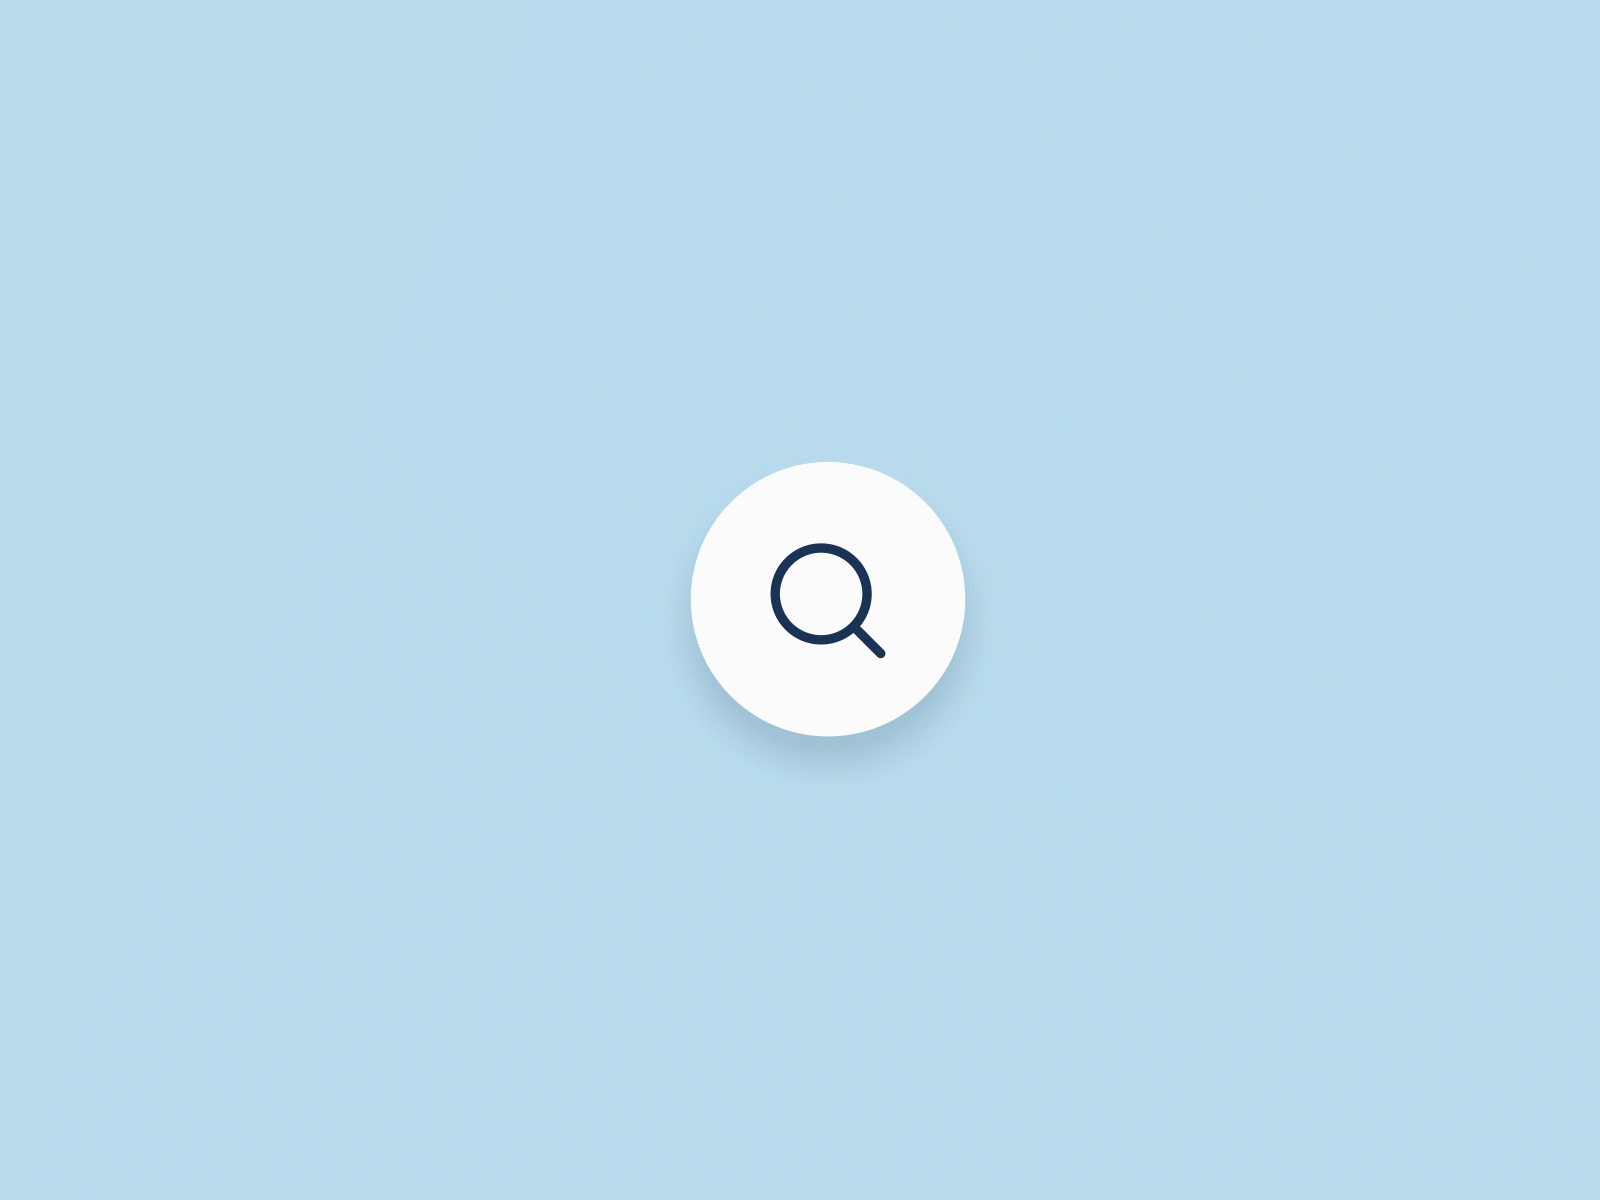 #DailyUIChallenge 022 - Search animation animation after effects dailyui dailyui 022 dailyuichallenge interaction search search bar